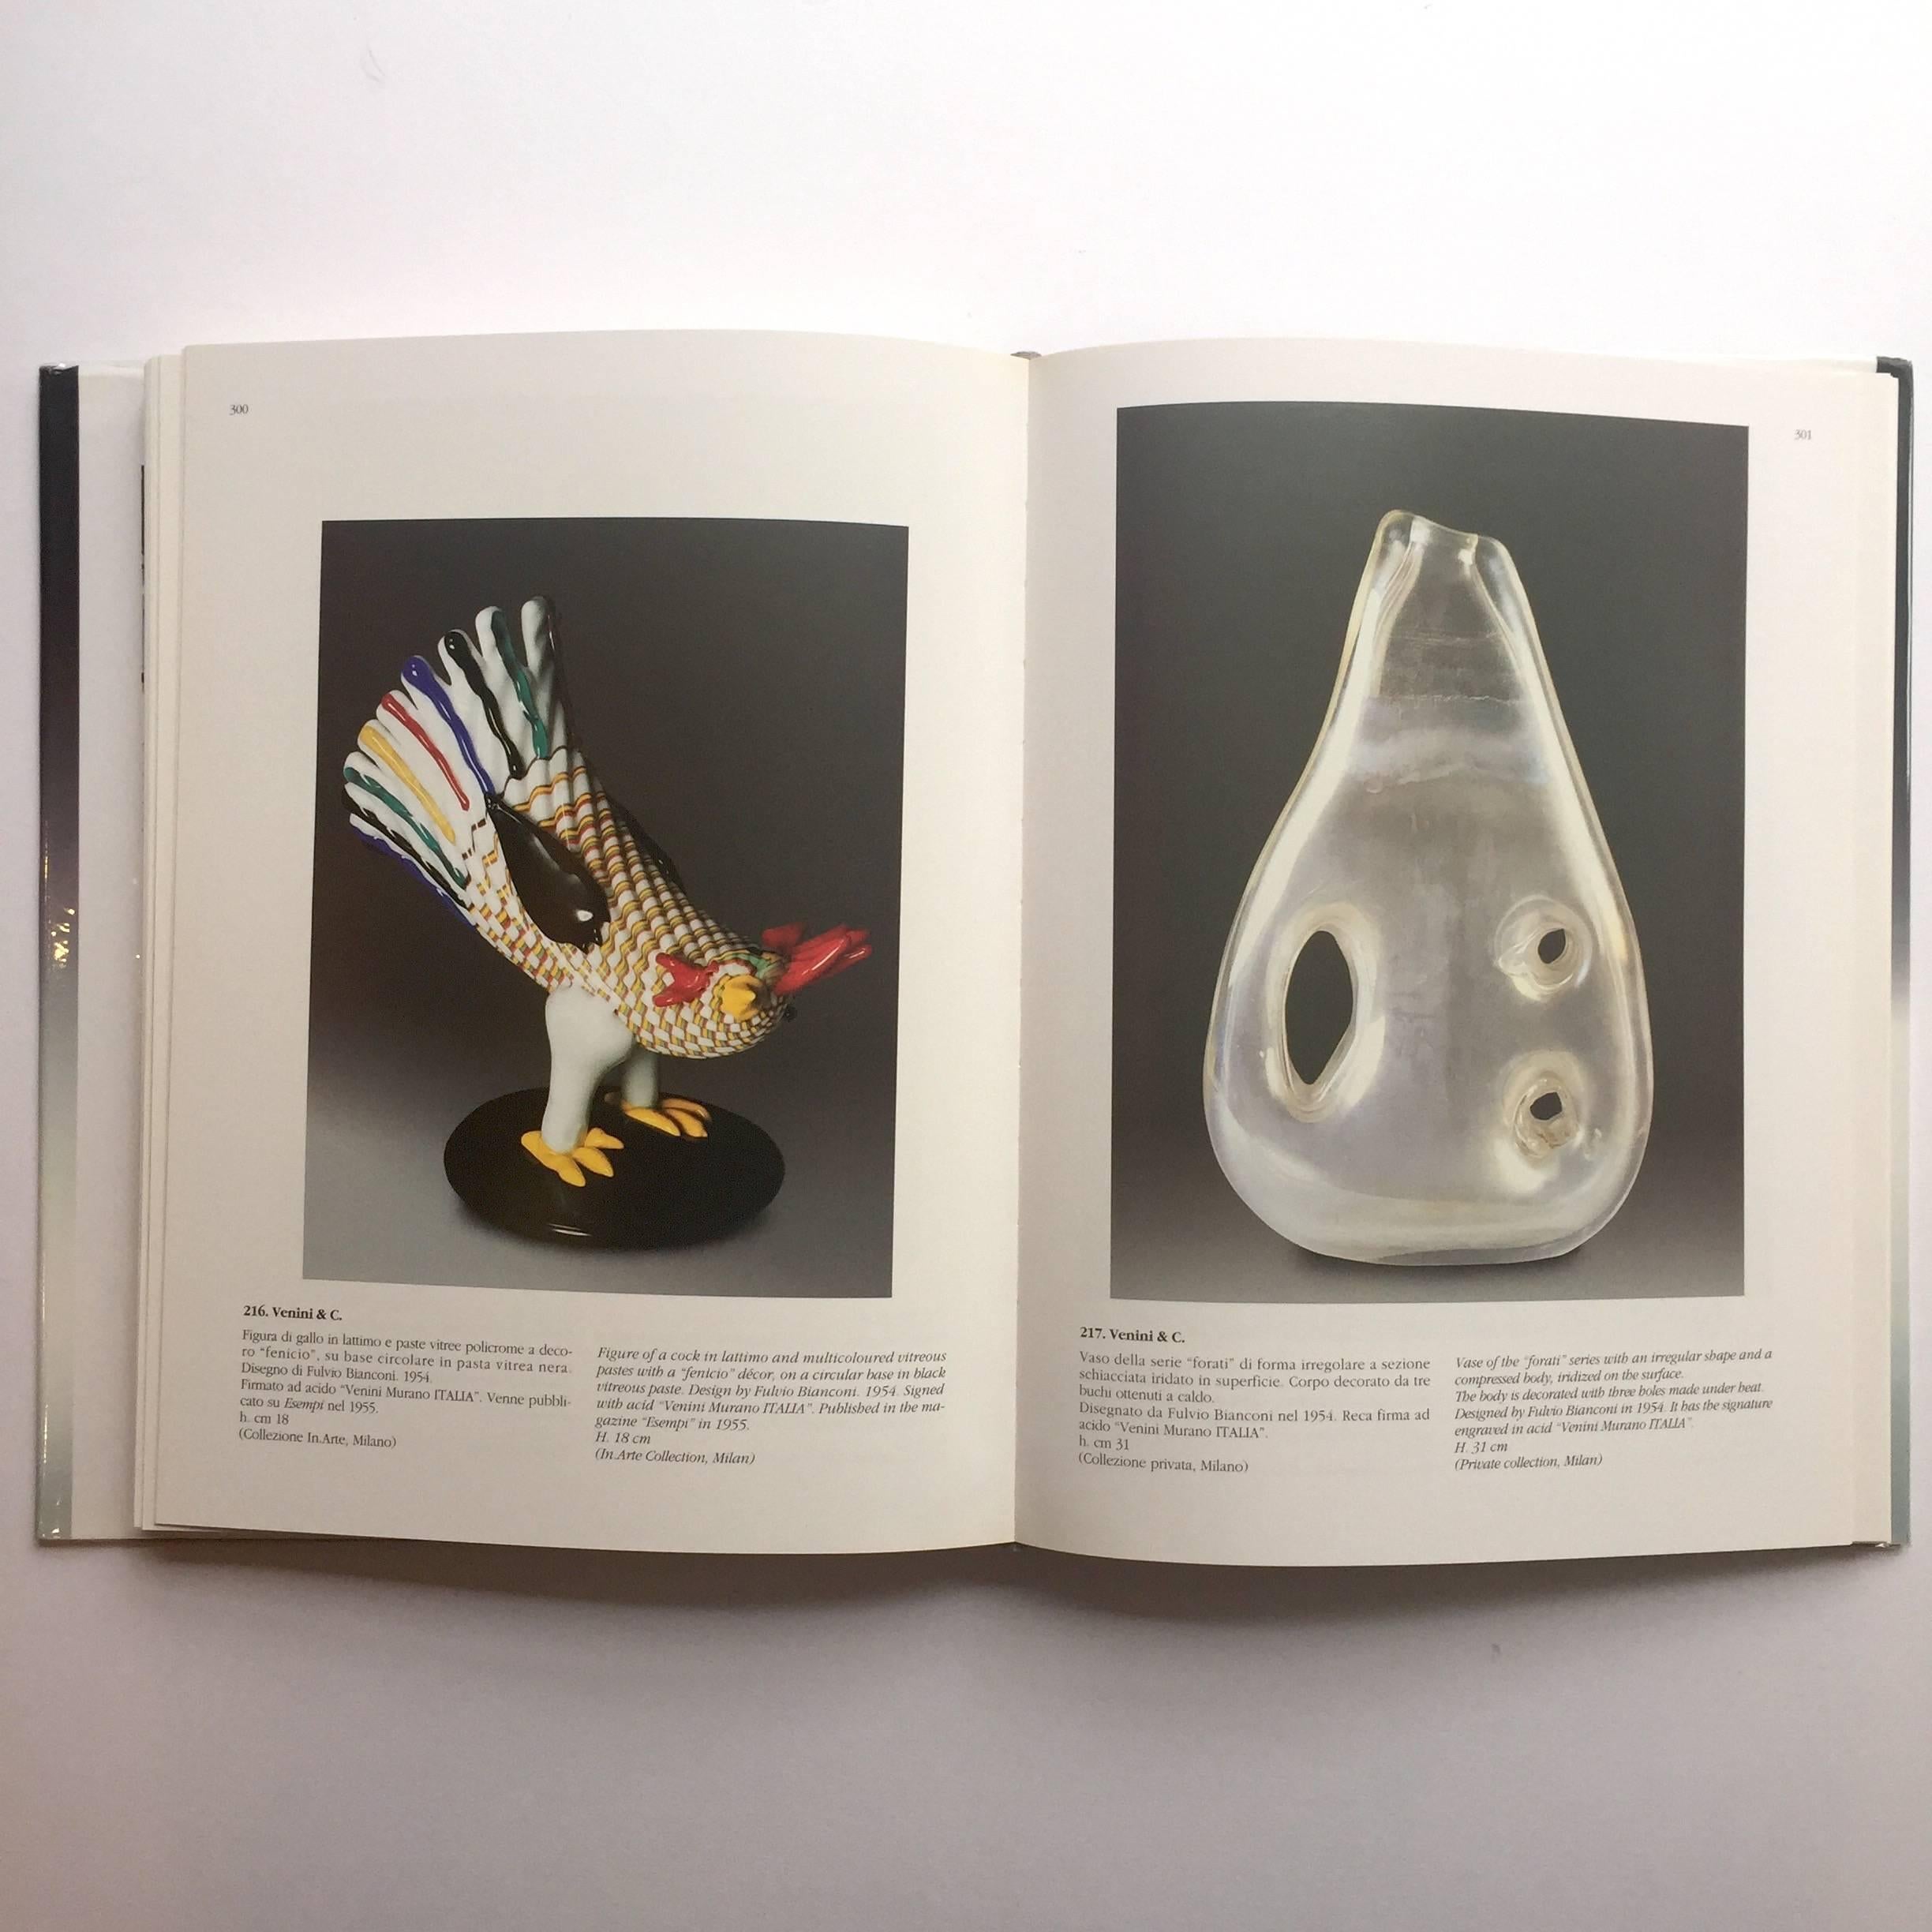 First edition, published by Bocca Editori, Milano, 1996.

This book documents the many beautiful and unique creations to come out of the glass making factories of the Venetian island of Murano. Glassworks have been created on the island for over a